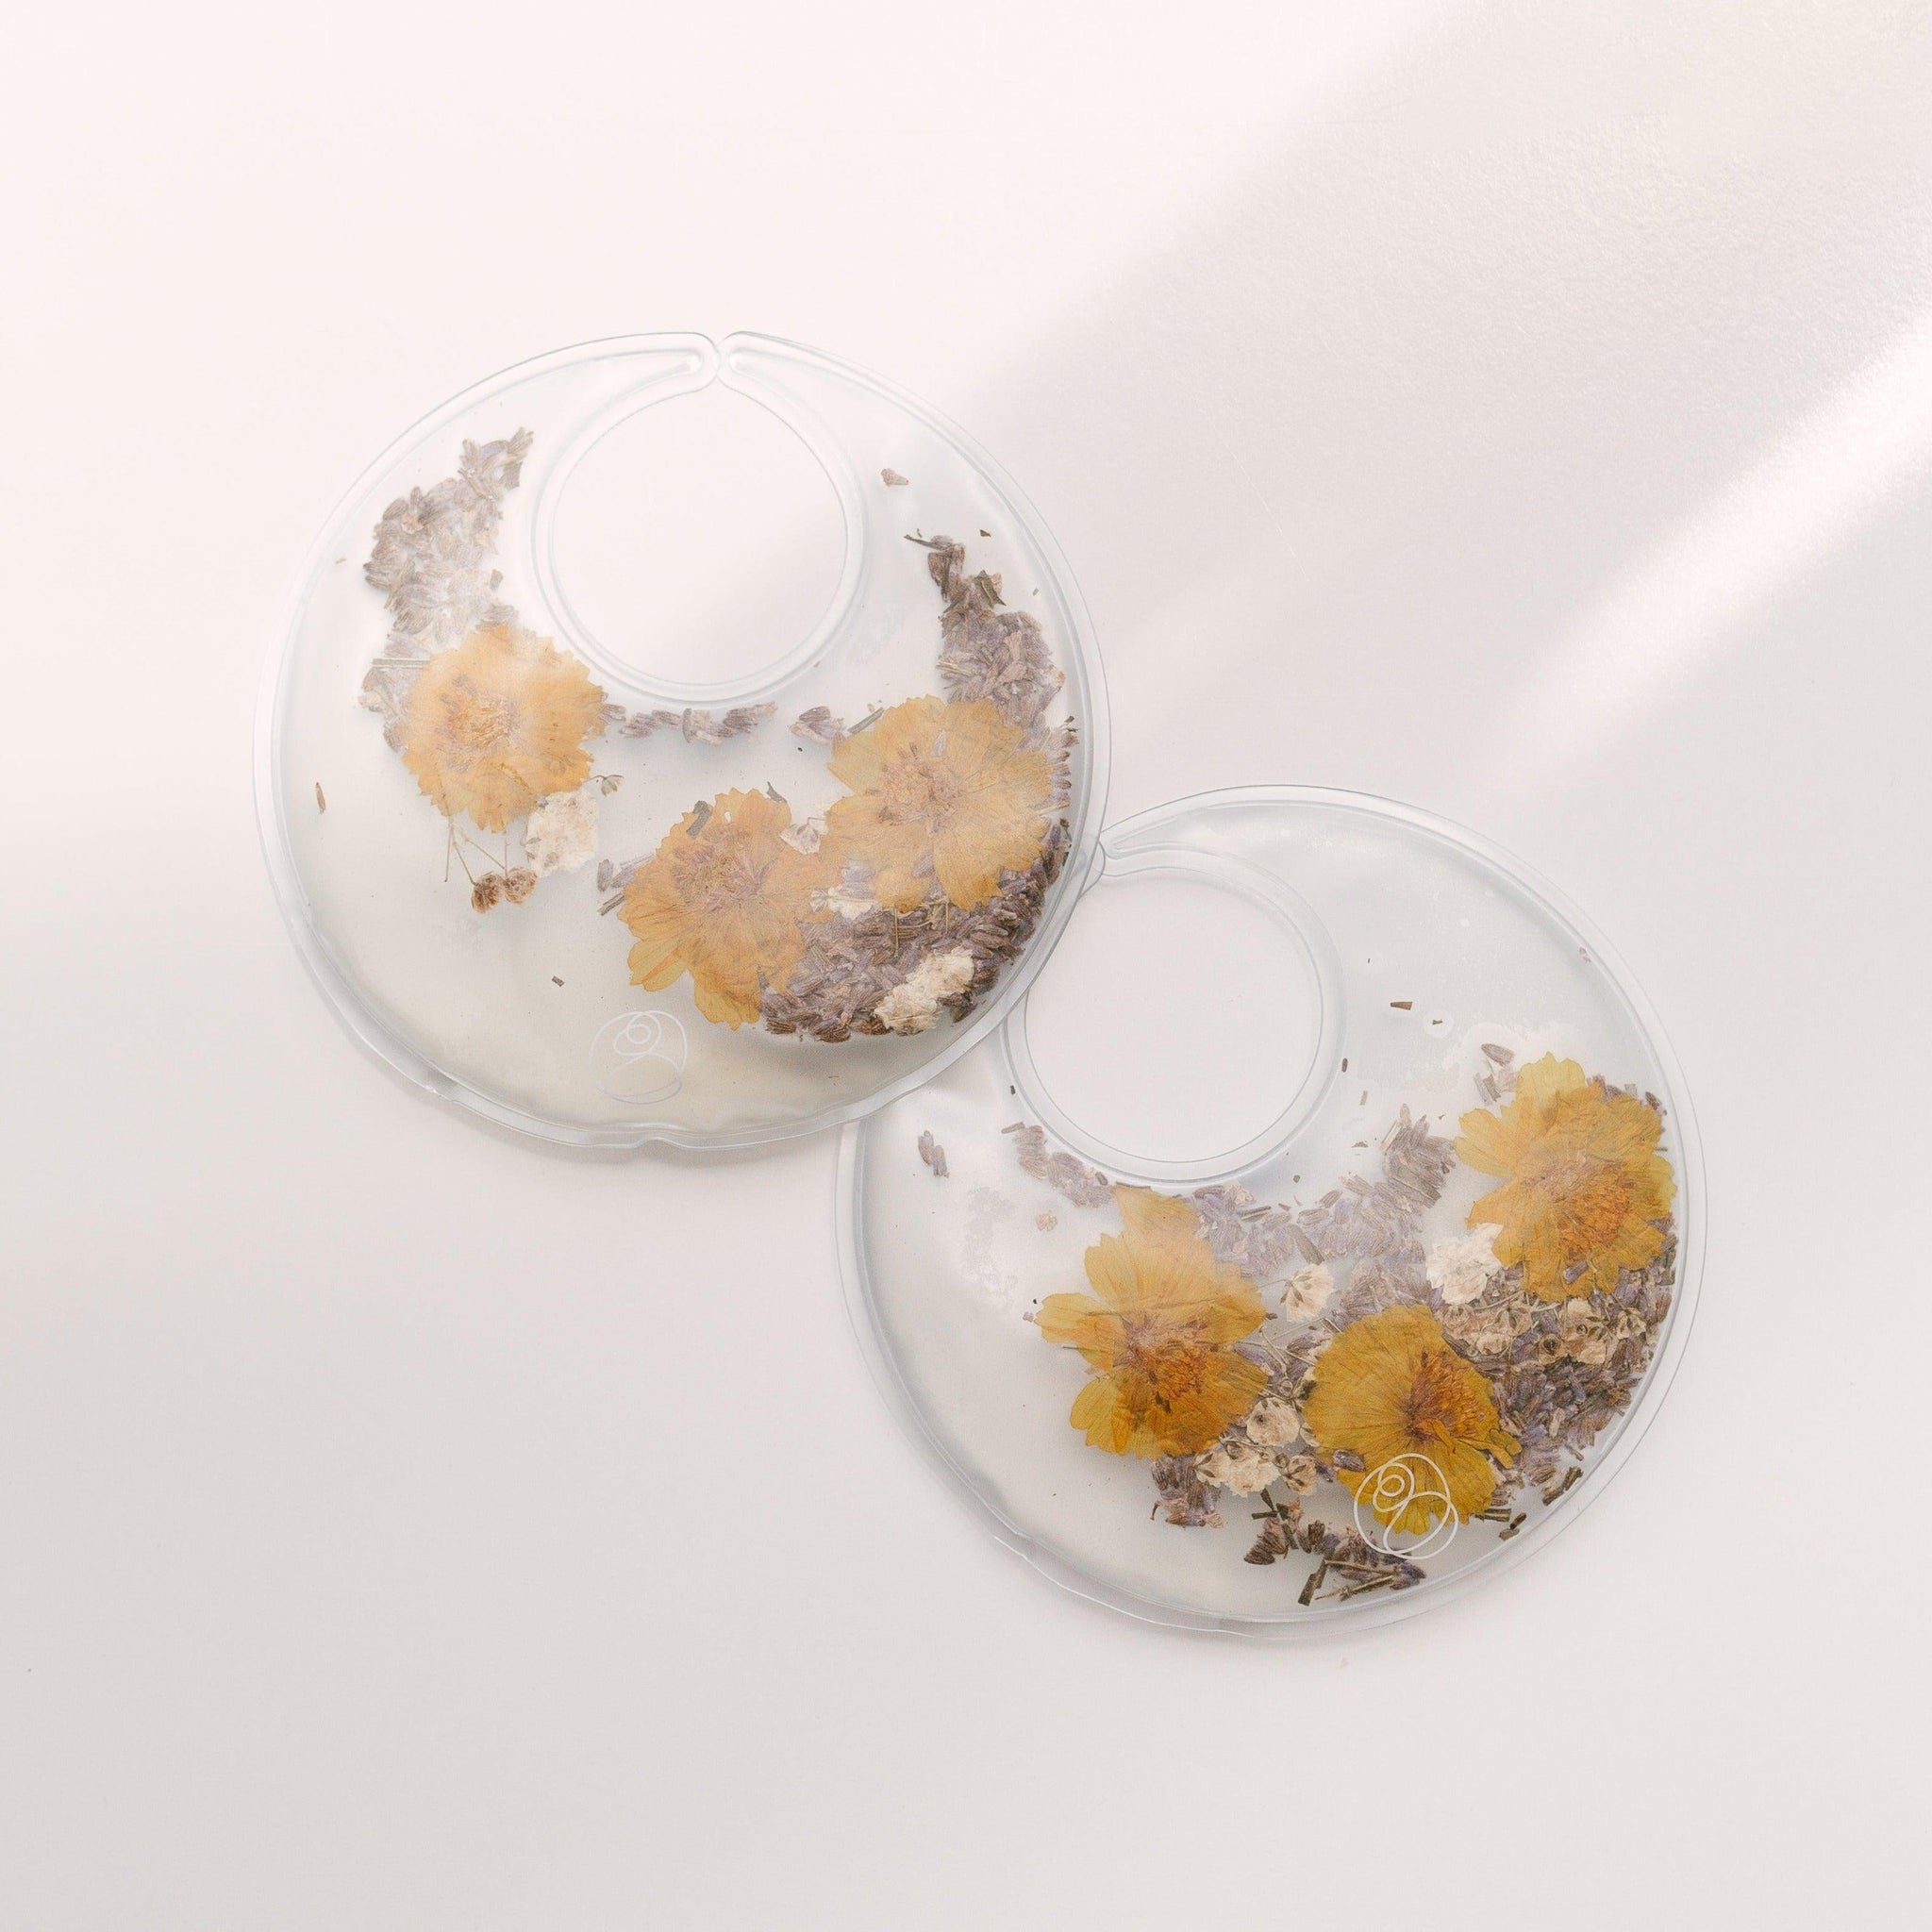 Bare Mum Breast Recovery Earrings adorned with dried flowers, perfect for breastfeeding mothers.